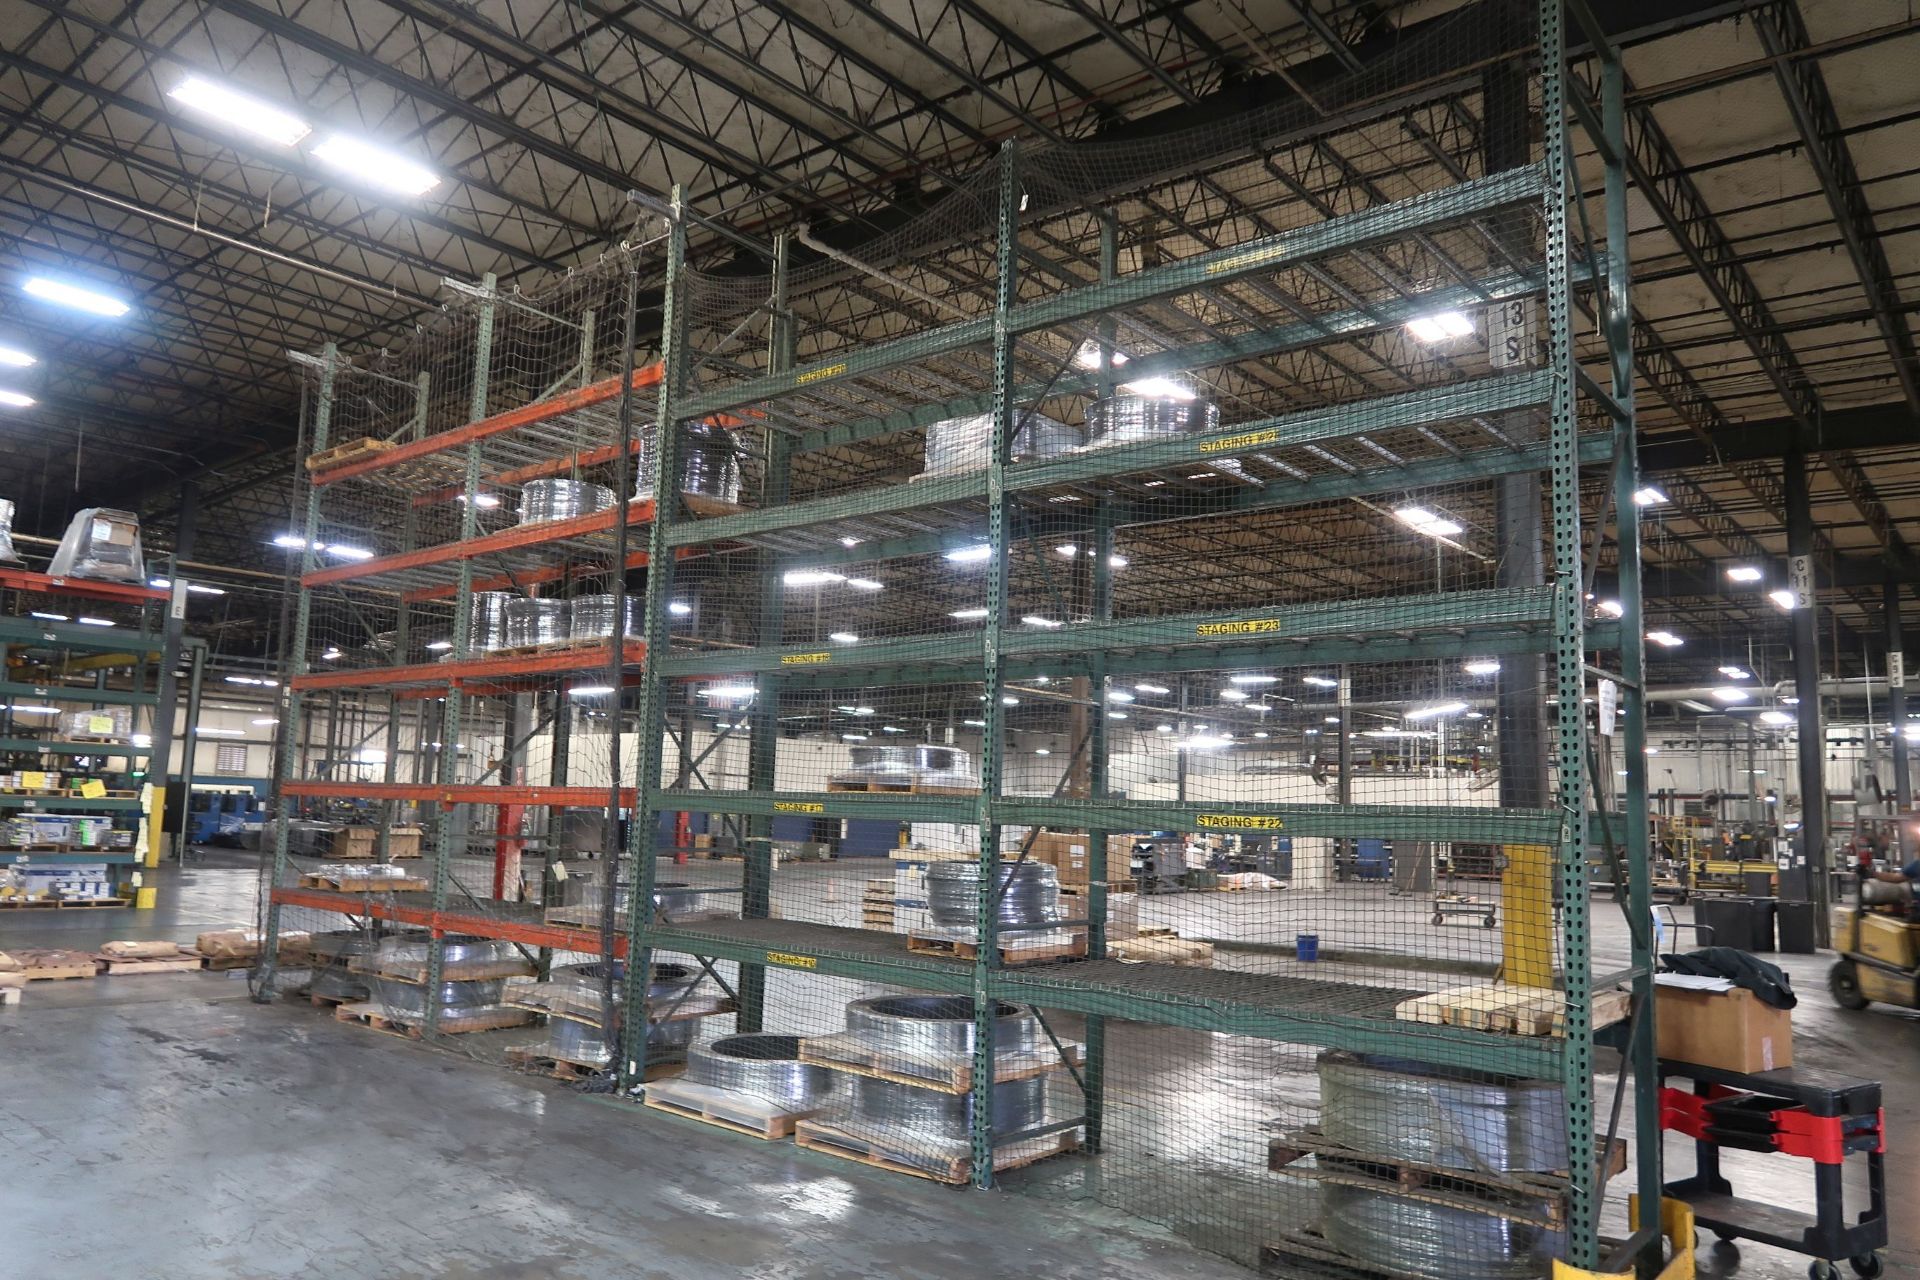 SECTIONS 42" X 108" X 16' HIGH PALLET RACK **LOADING PRICE DUE TO ERRA - $200.00**